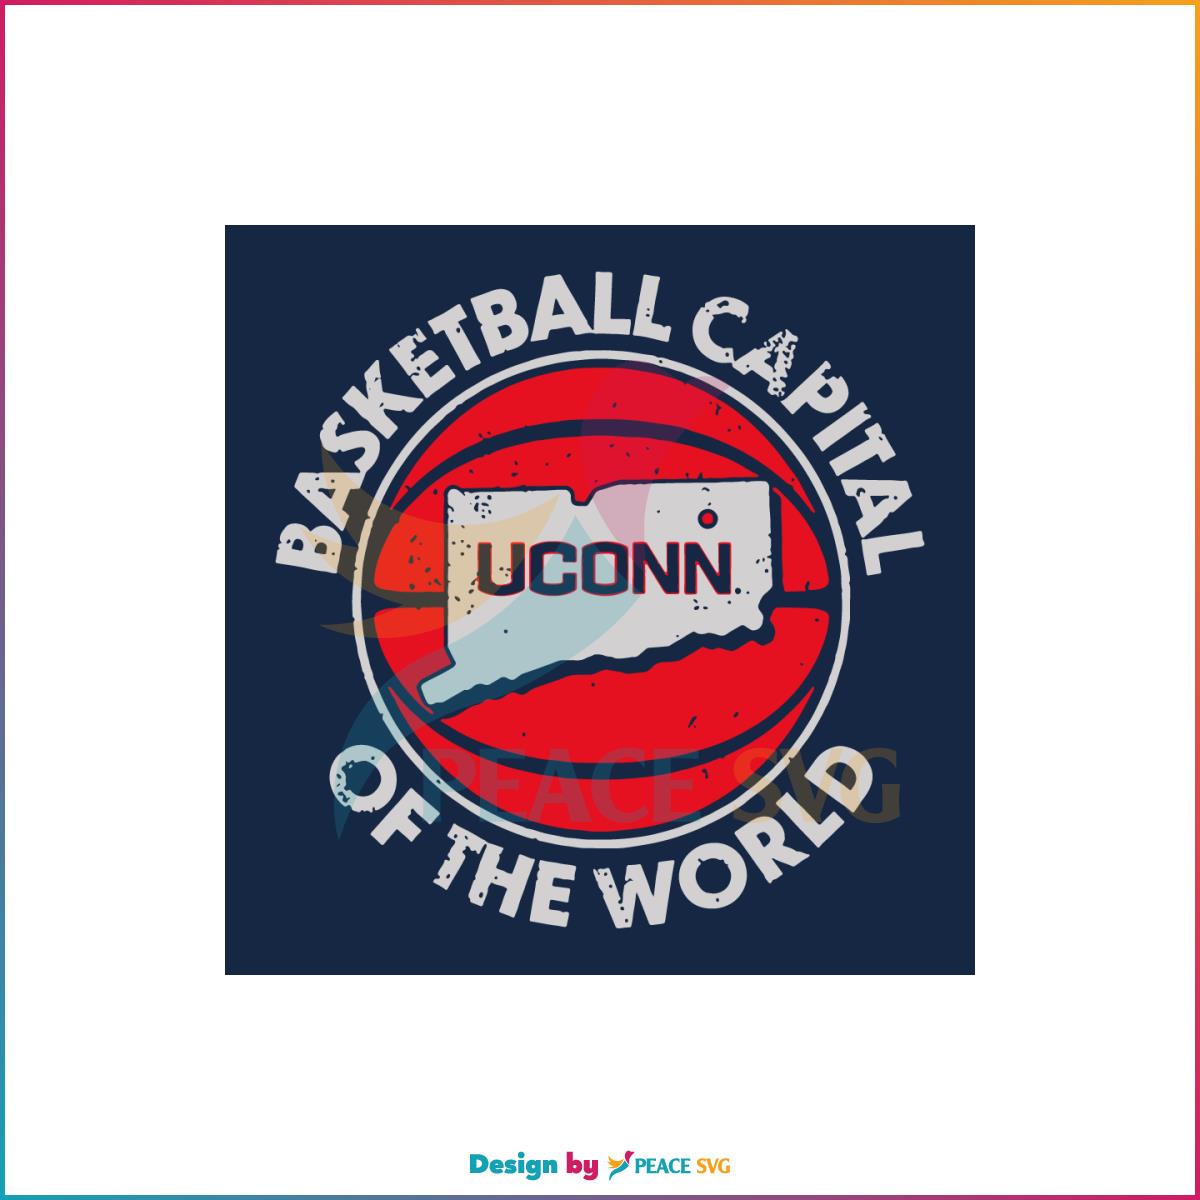 Uconn Basketball Capital Of The World Svg Cutting Files